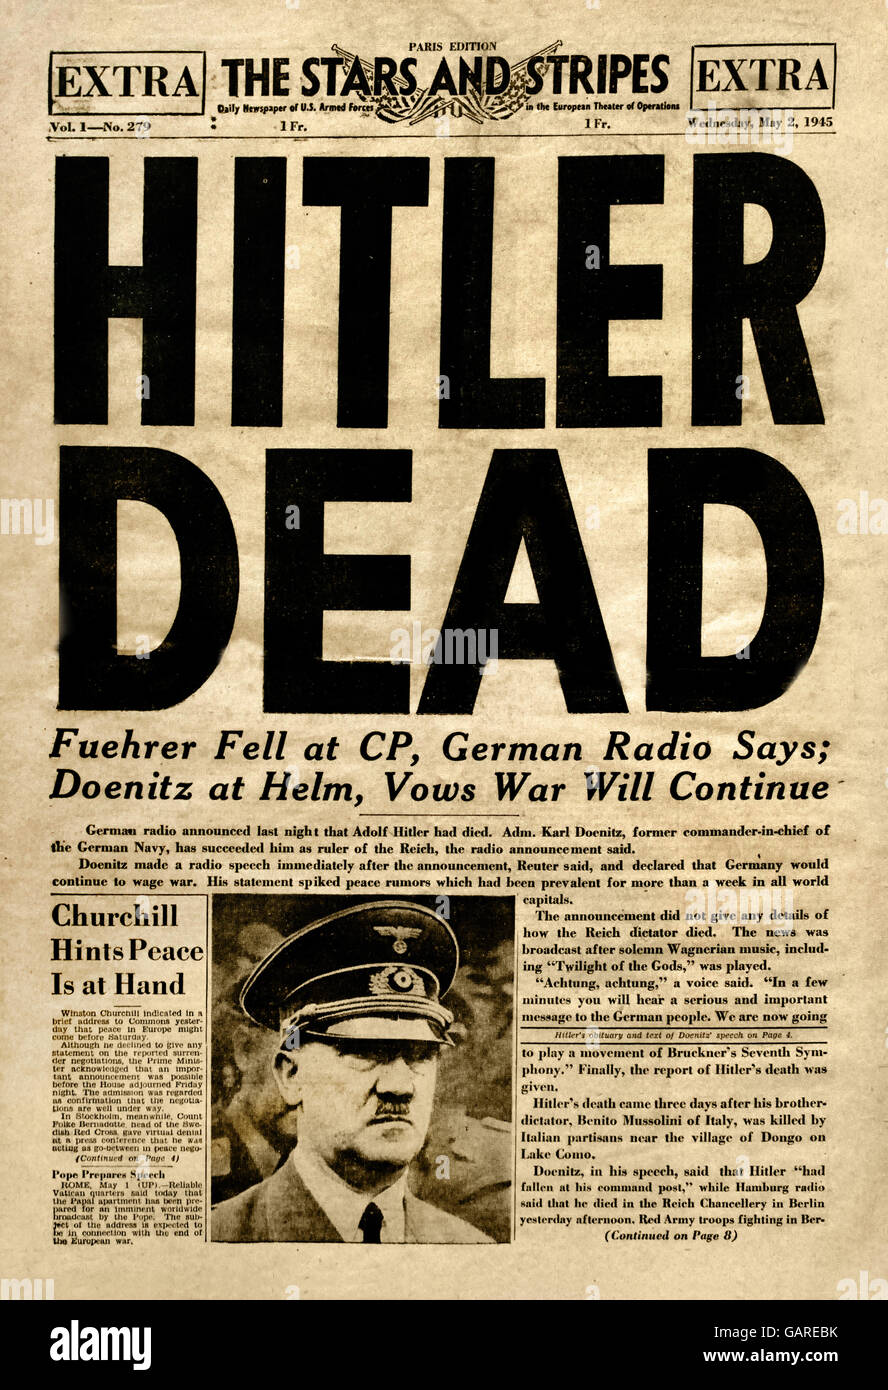 Hitler Death 2 May 1945 (The Stars and Stripes ) Berlin Nazi Germany ( Fuehrer Fell at CP German Radio Says ) Stock Photo